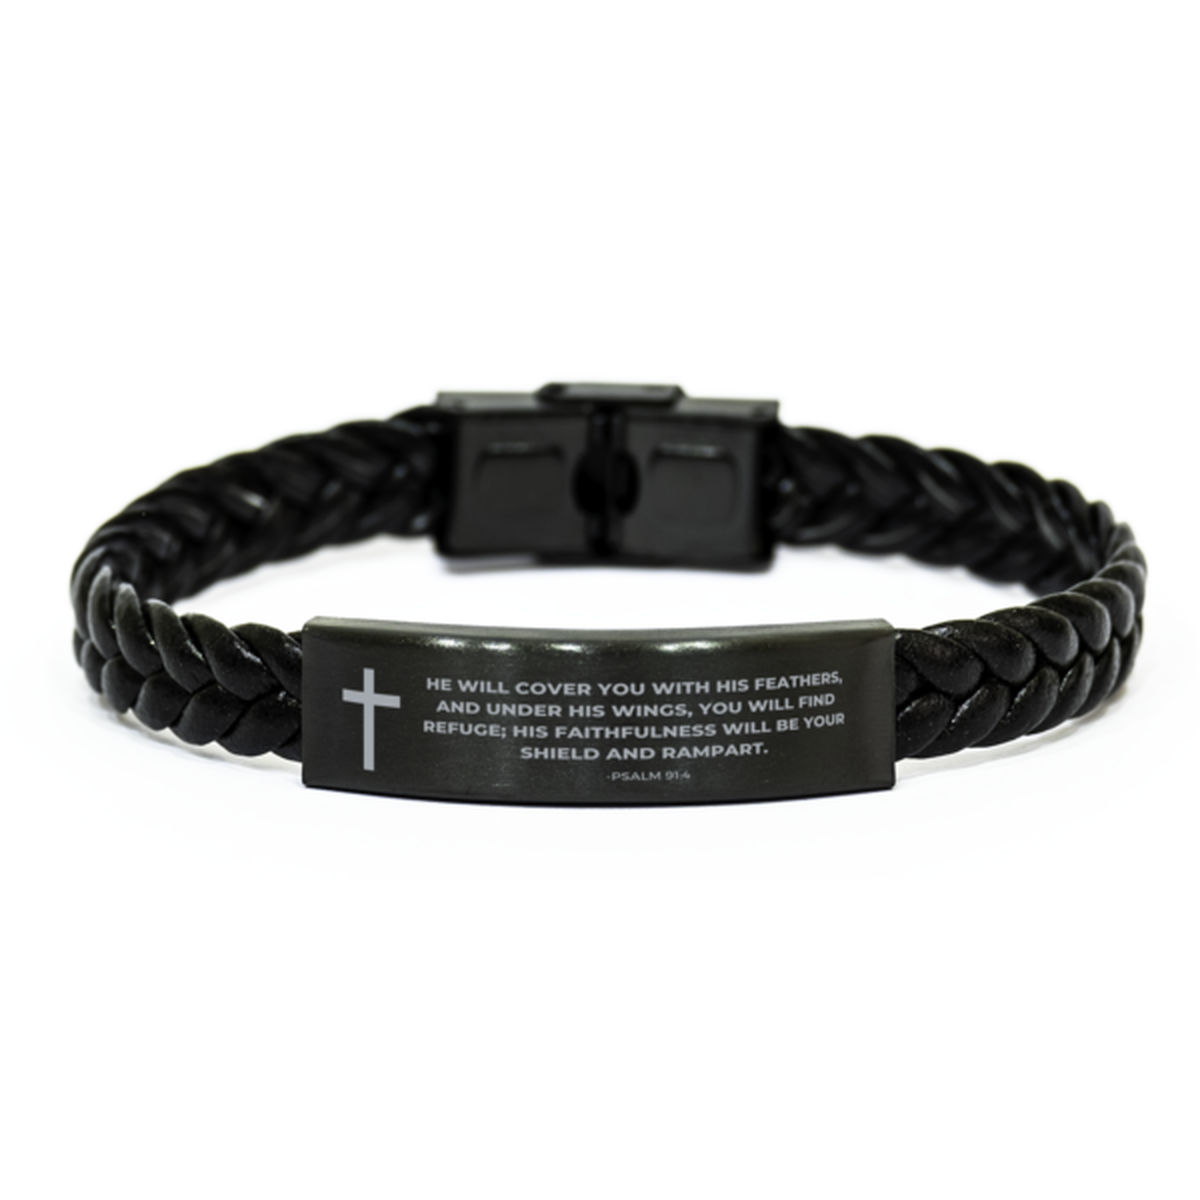 Baptism Gifts For Teenage Boys Girls, Christian Bible Verse Braided Leather Bracelet, He will cover you with his feathers, Catholic Confirmation Gifts for Son, Godson, Grandson, Nephew